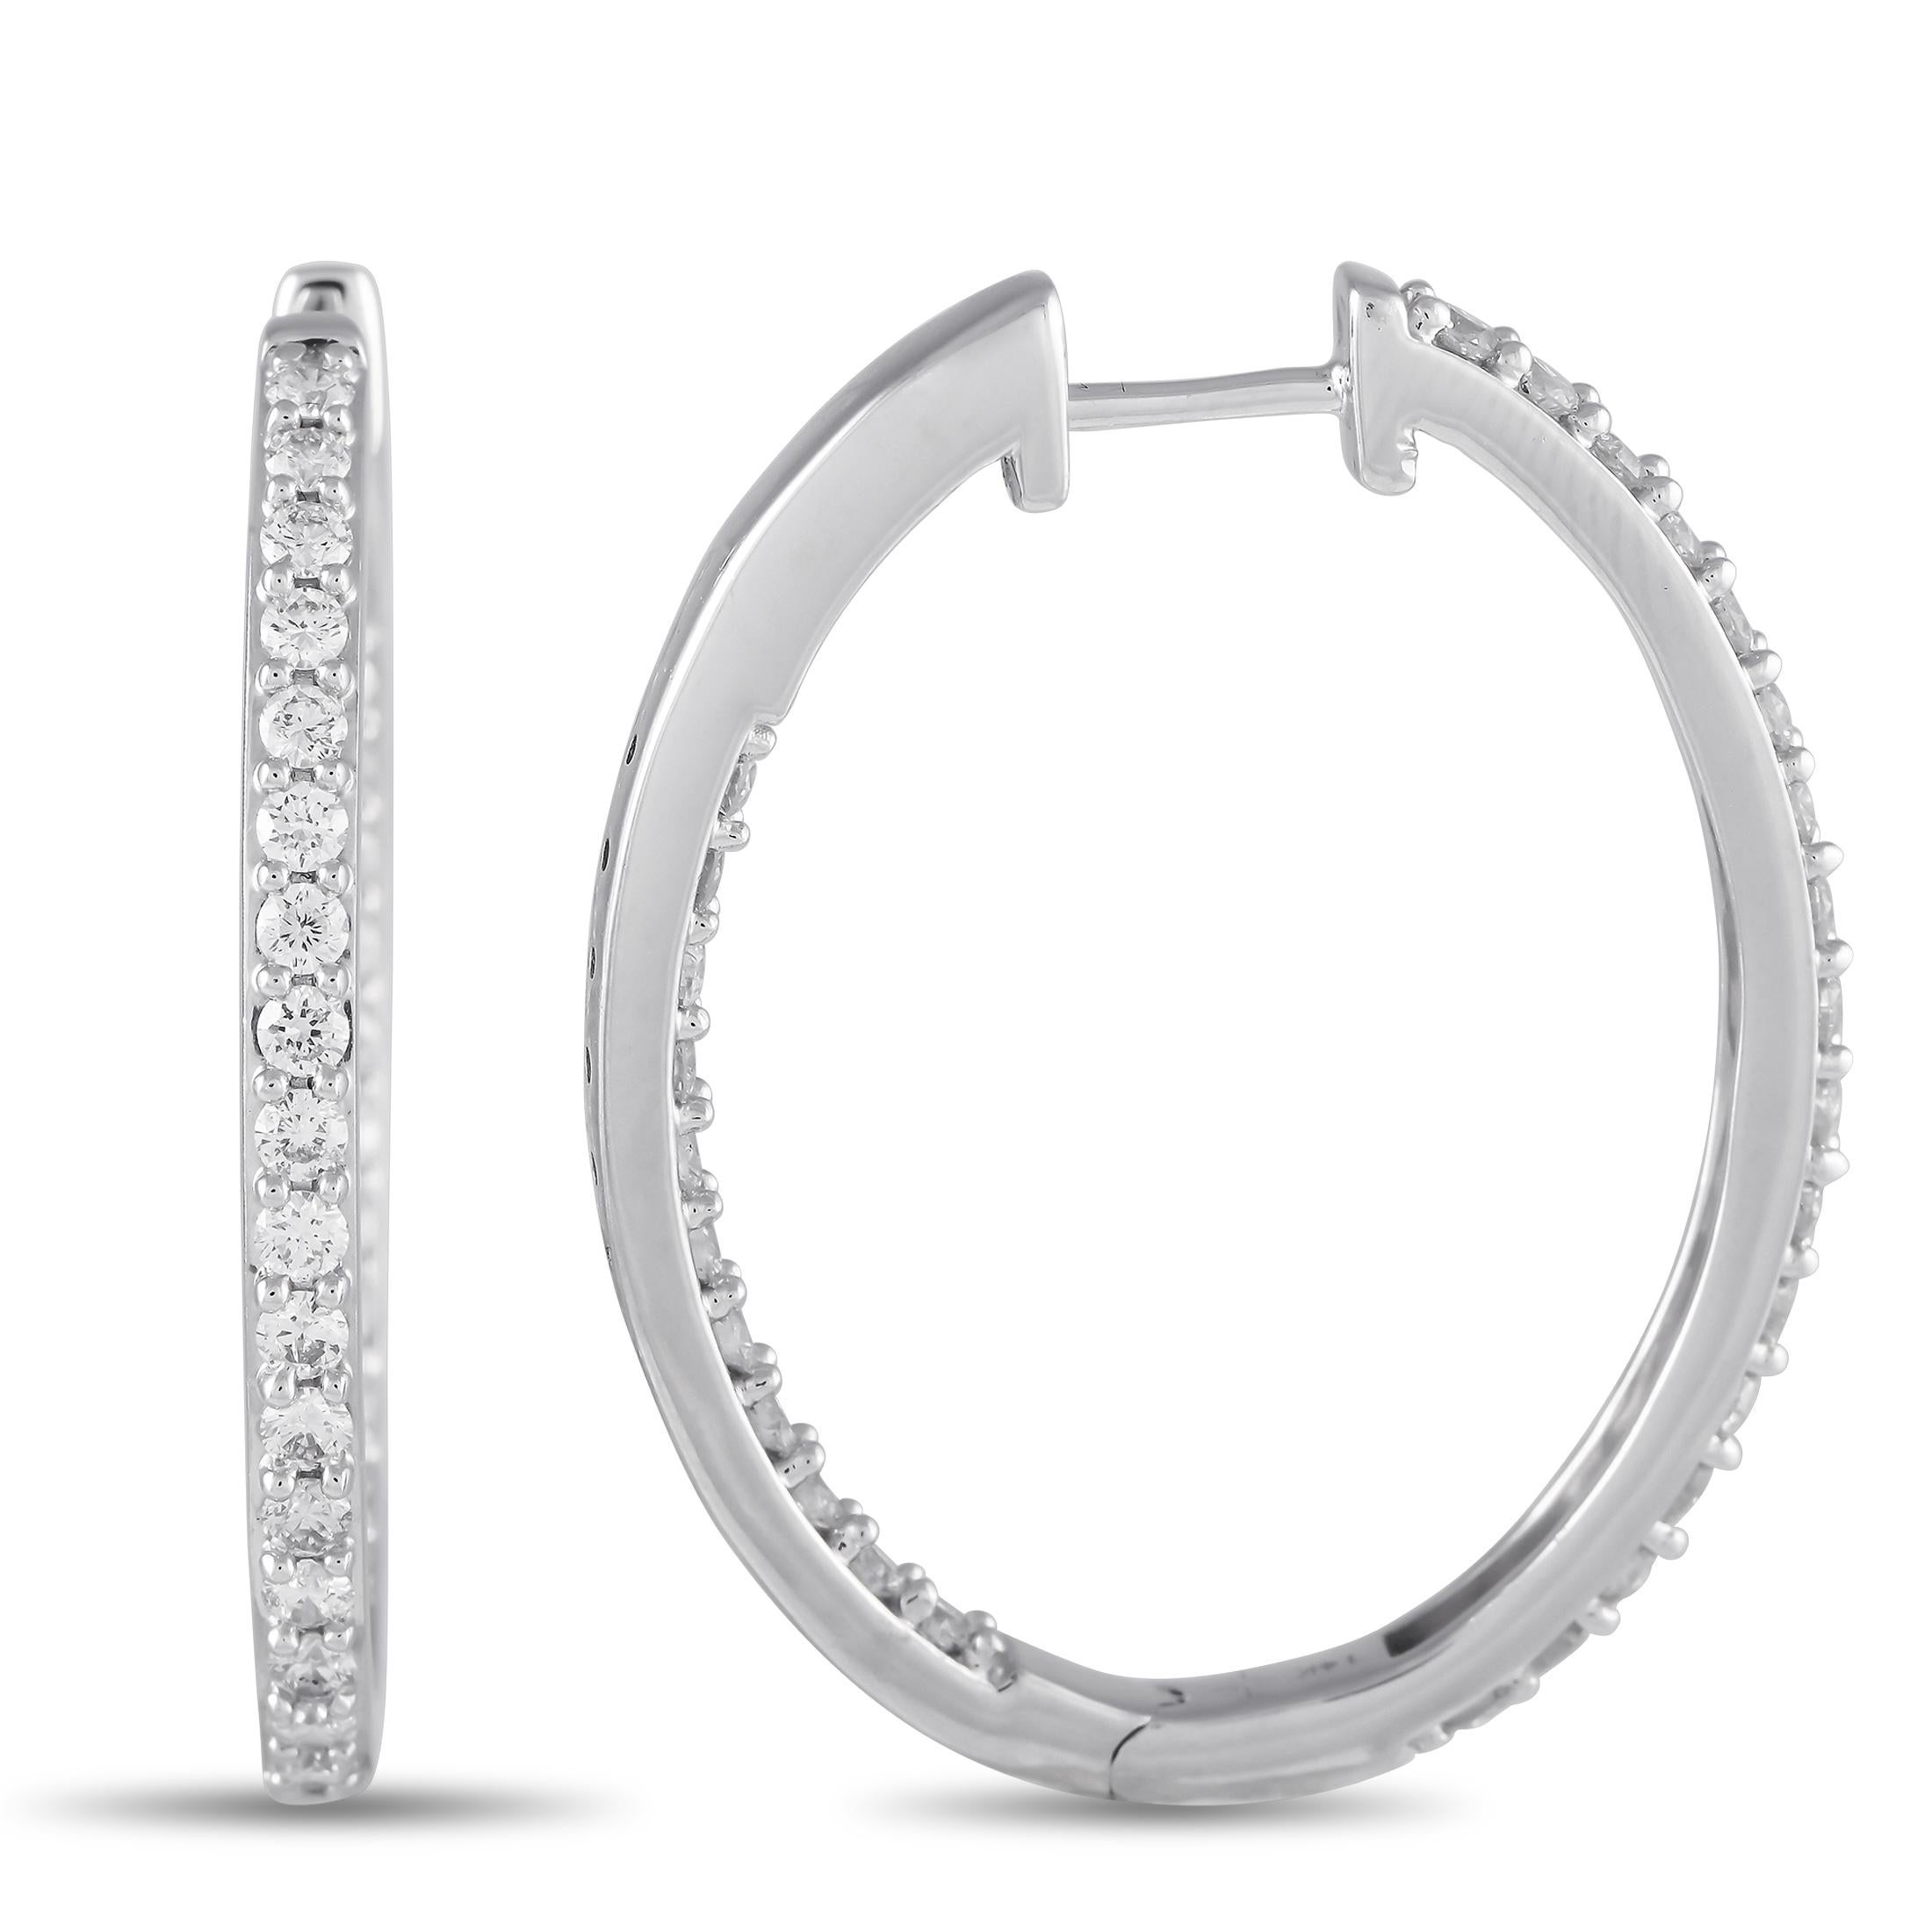 These 14K white gold hoop earrings are simple and statement. Each one features a sleek, minimalist setting that measures 1.25 long by 1.0 wide. Diamonds with a total weight of 1.50 carats allow them to effortlessly catch the light.This jewelry piece